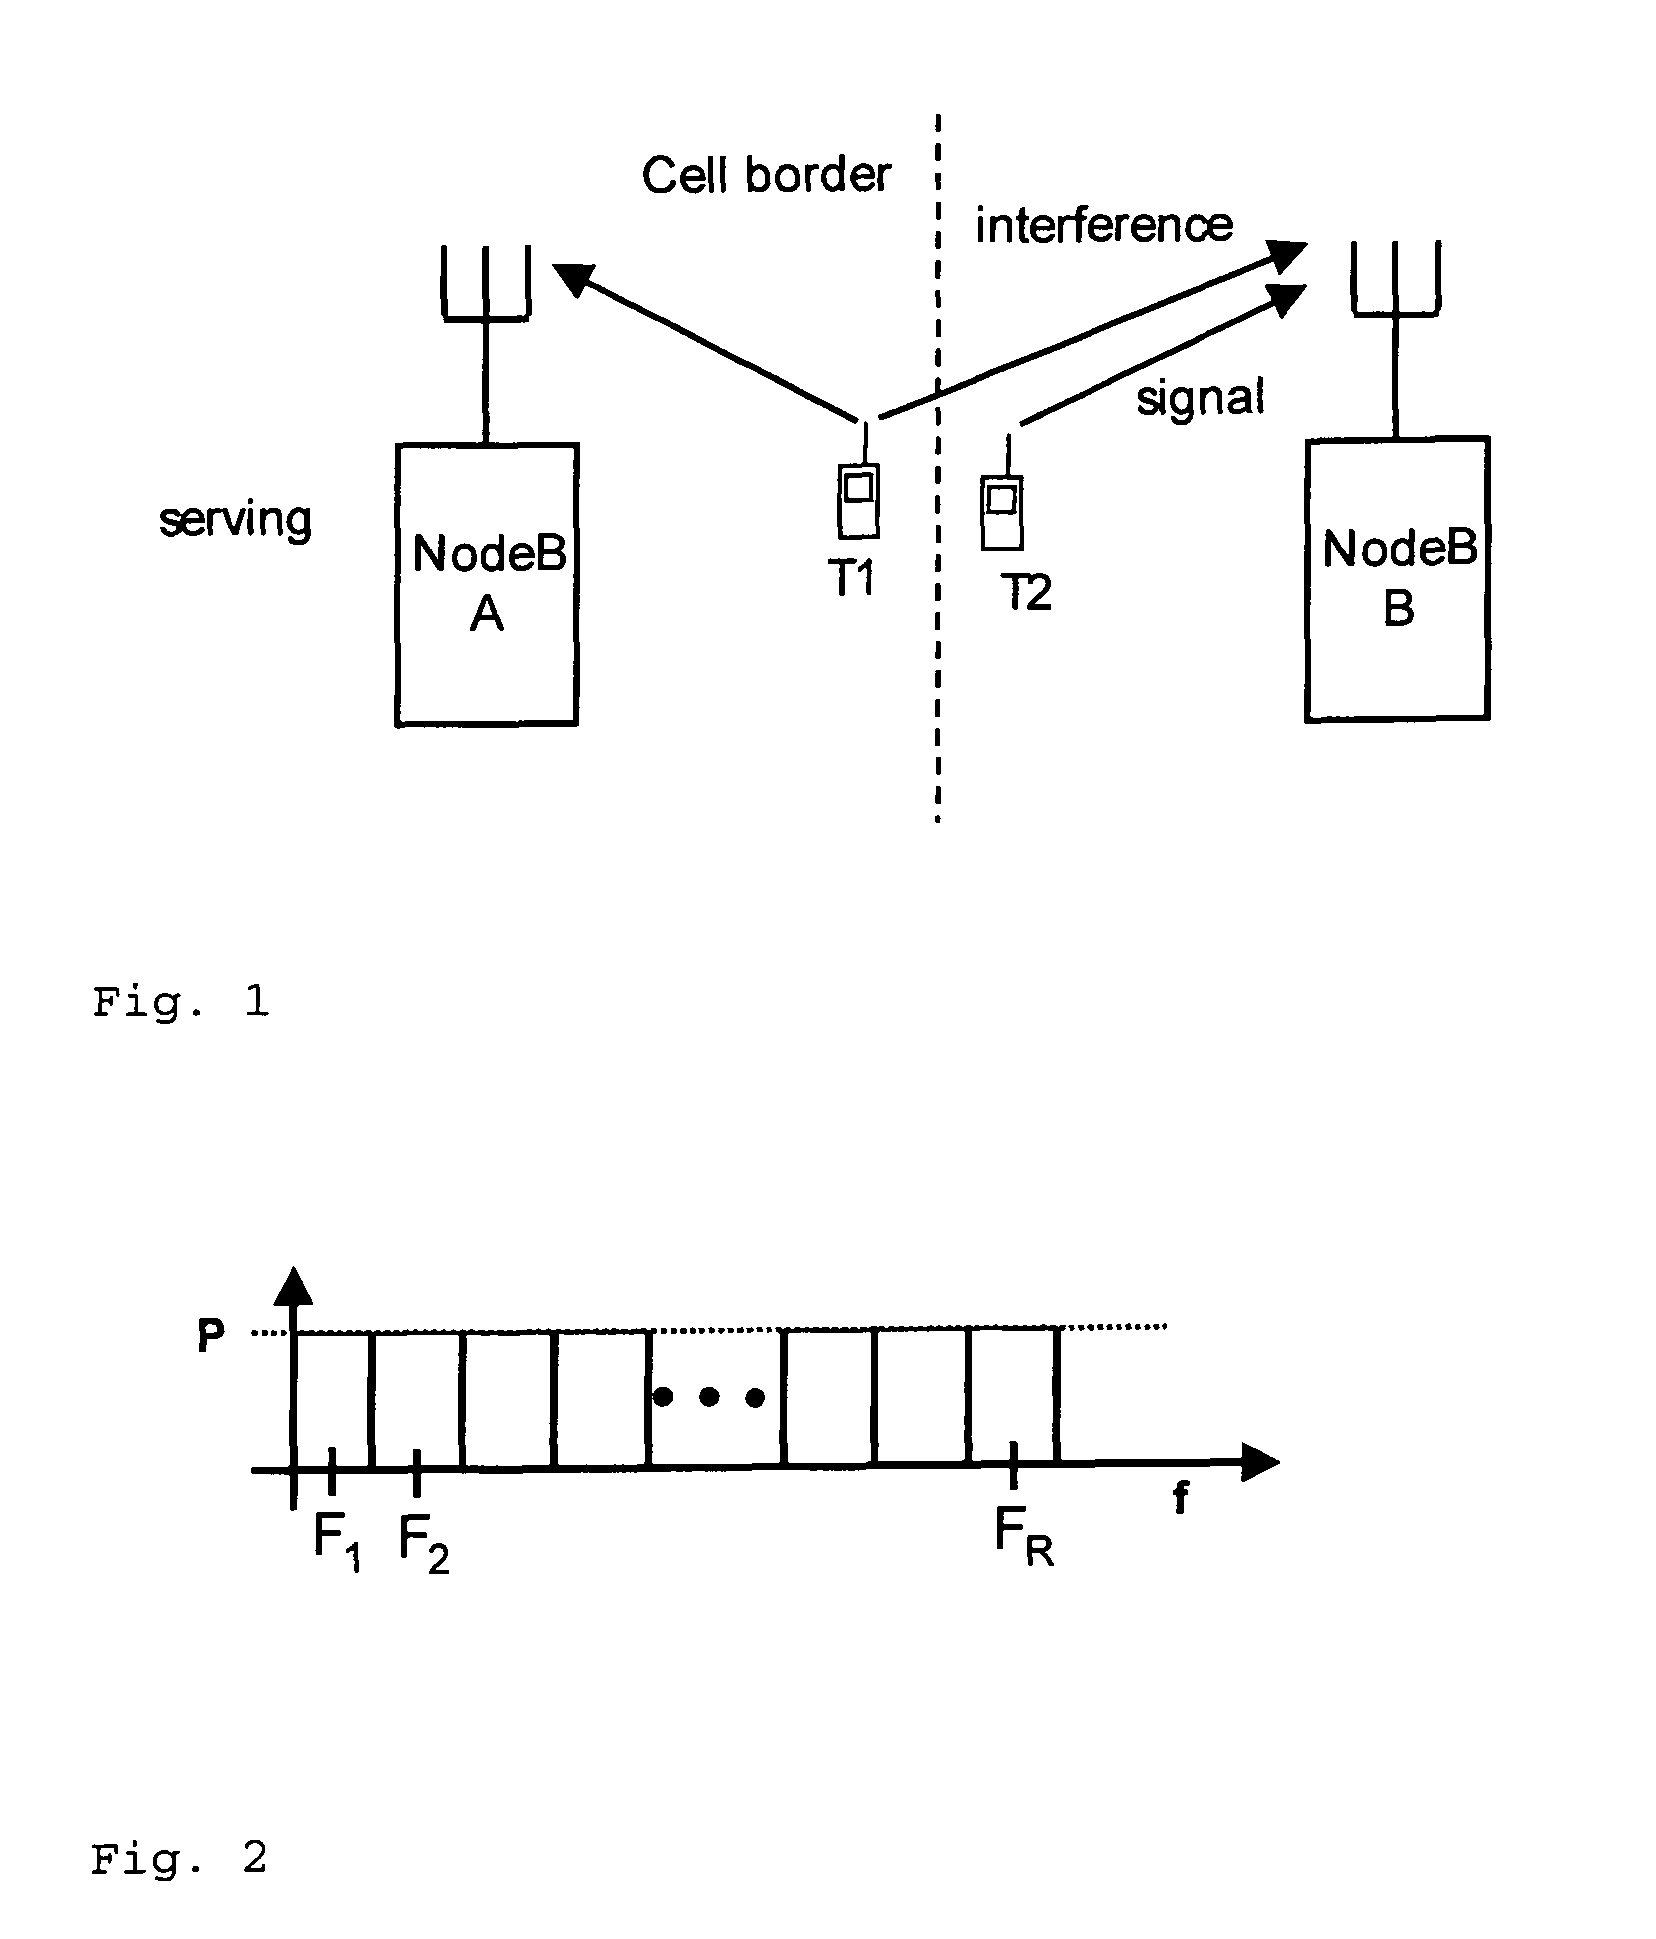 Method for uplink interference coordination on demand basis with cell identification, inter-cell interference detection and downlink measurement, a base station, a mobile terminal and a mobile network therefor